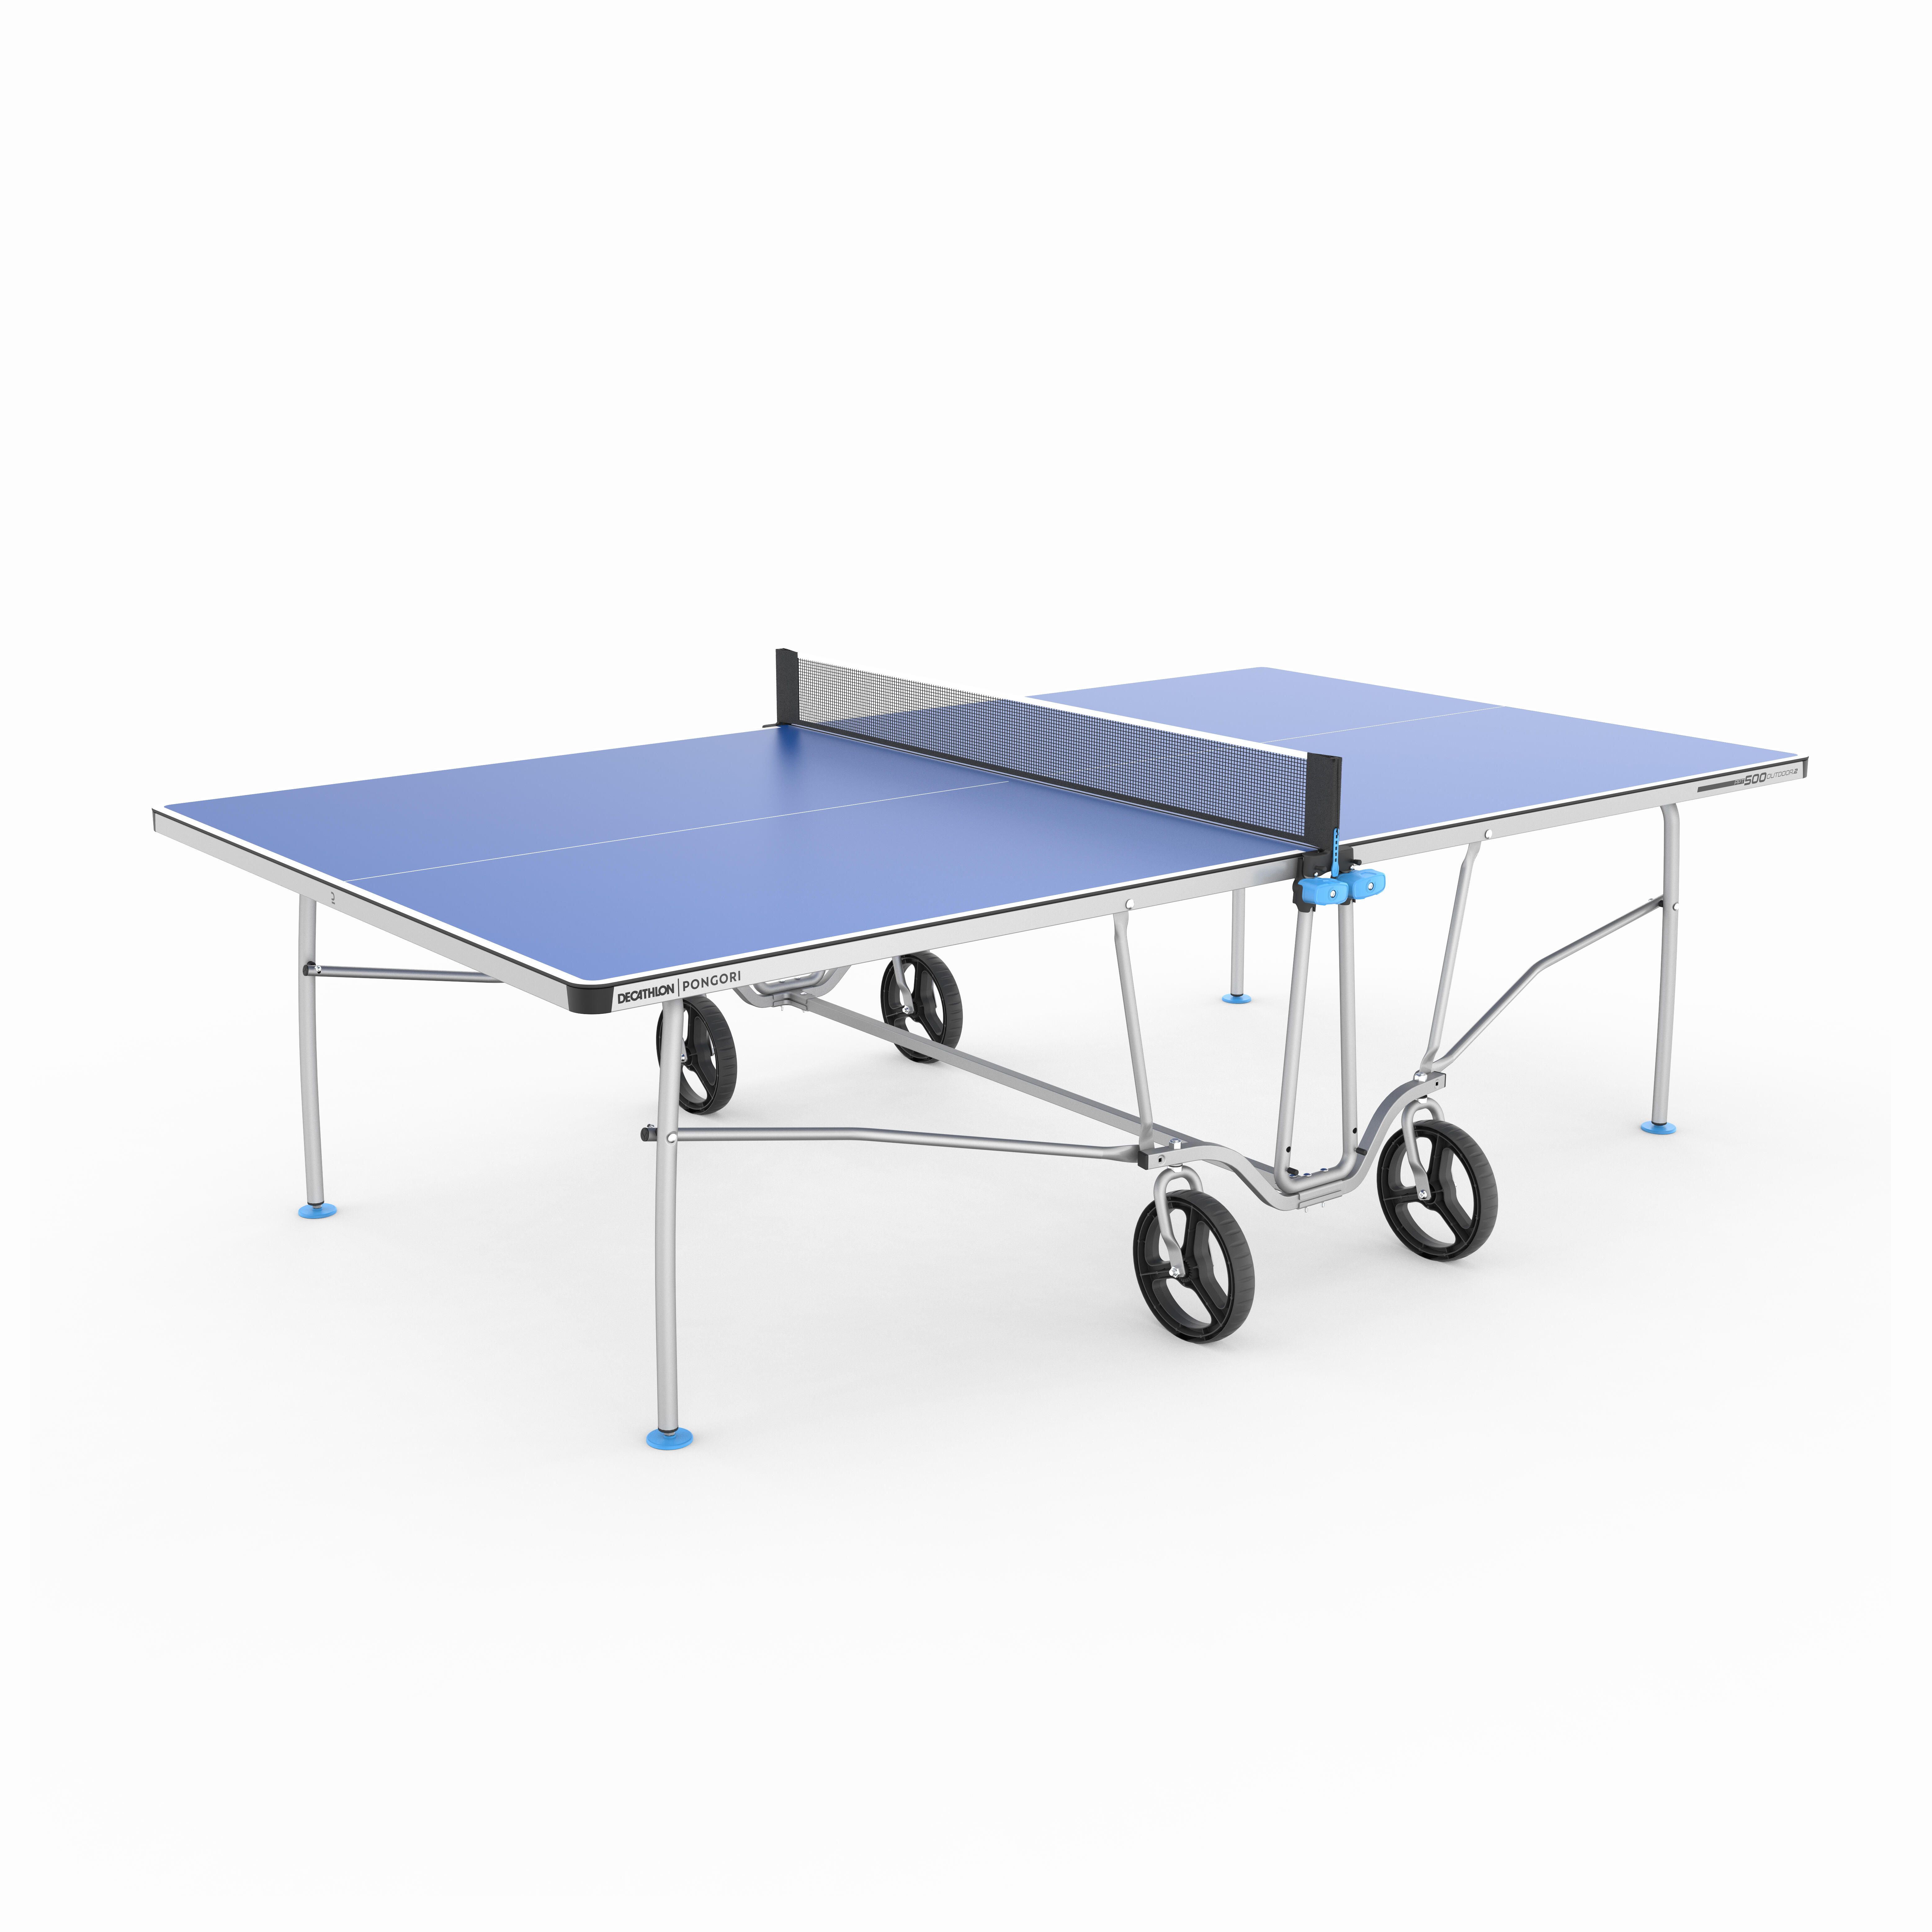 Image of Table Tennis Table Outdoor - PPT 500.2 Blue